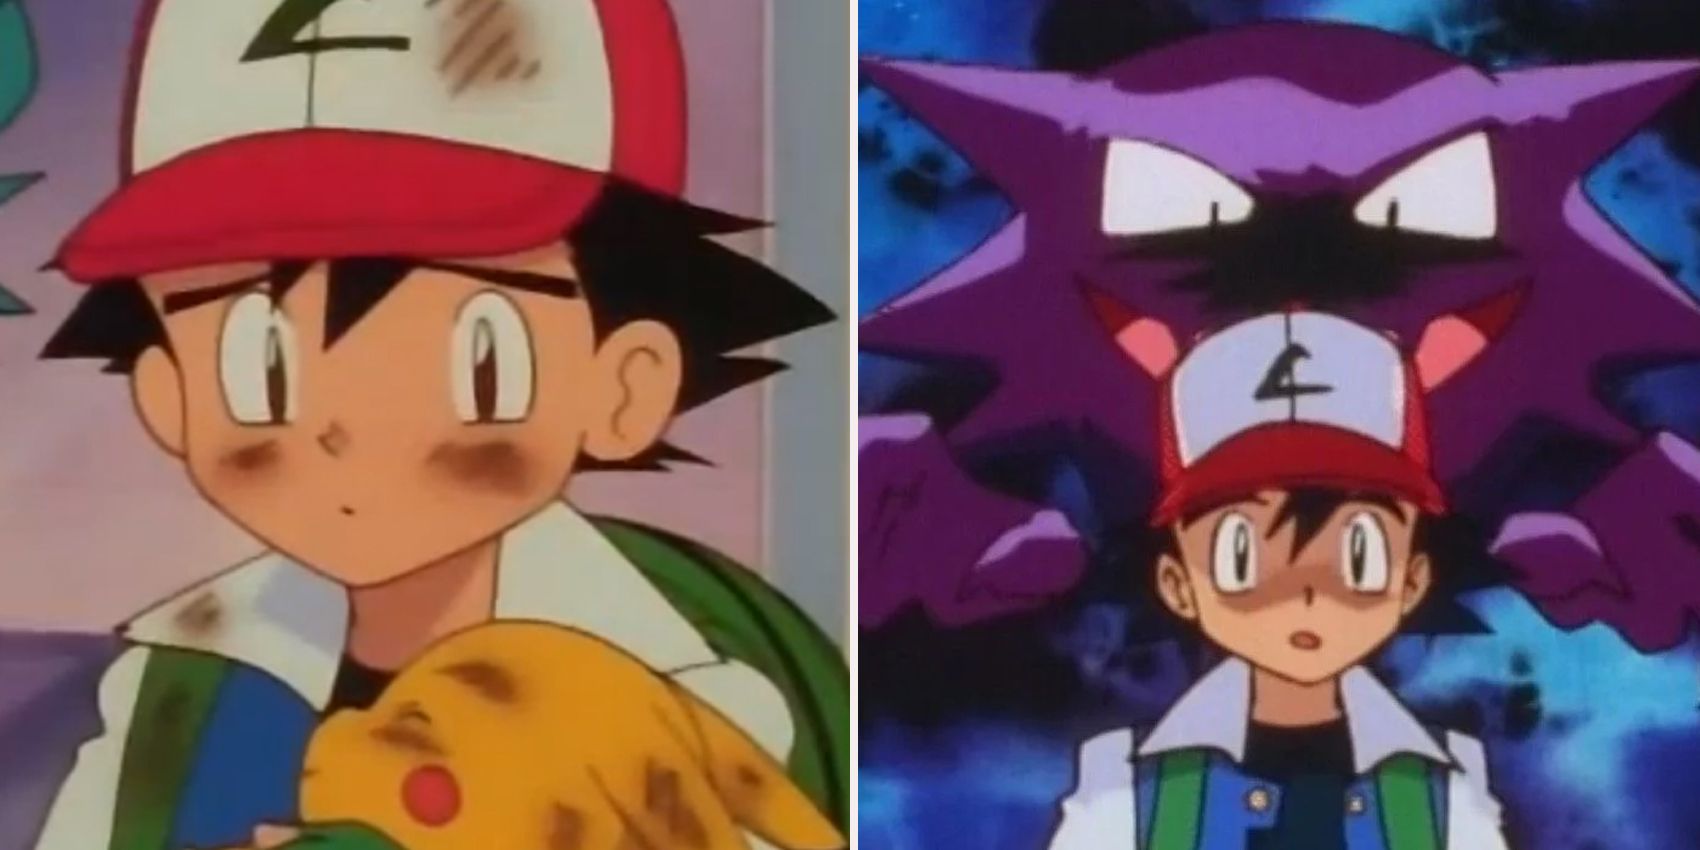 Who Was Ash Ketchum's Most Important Rival In Pokémon?